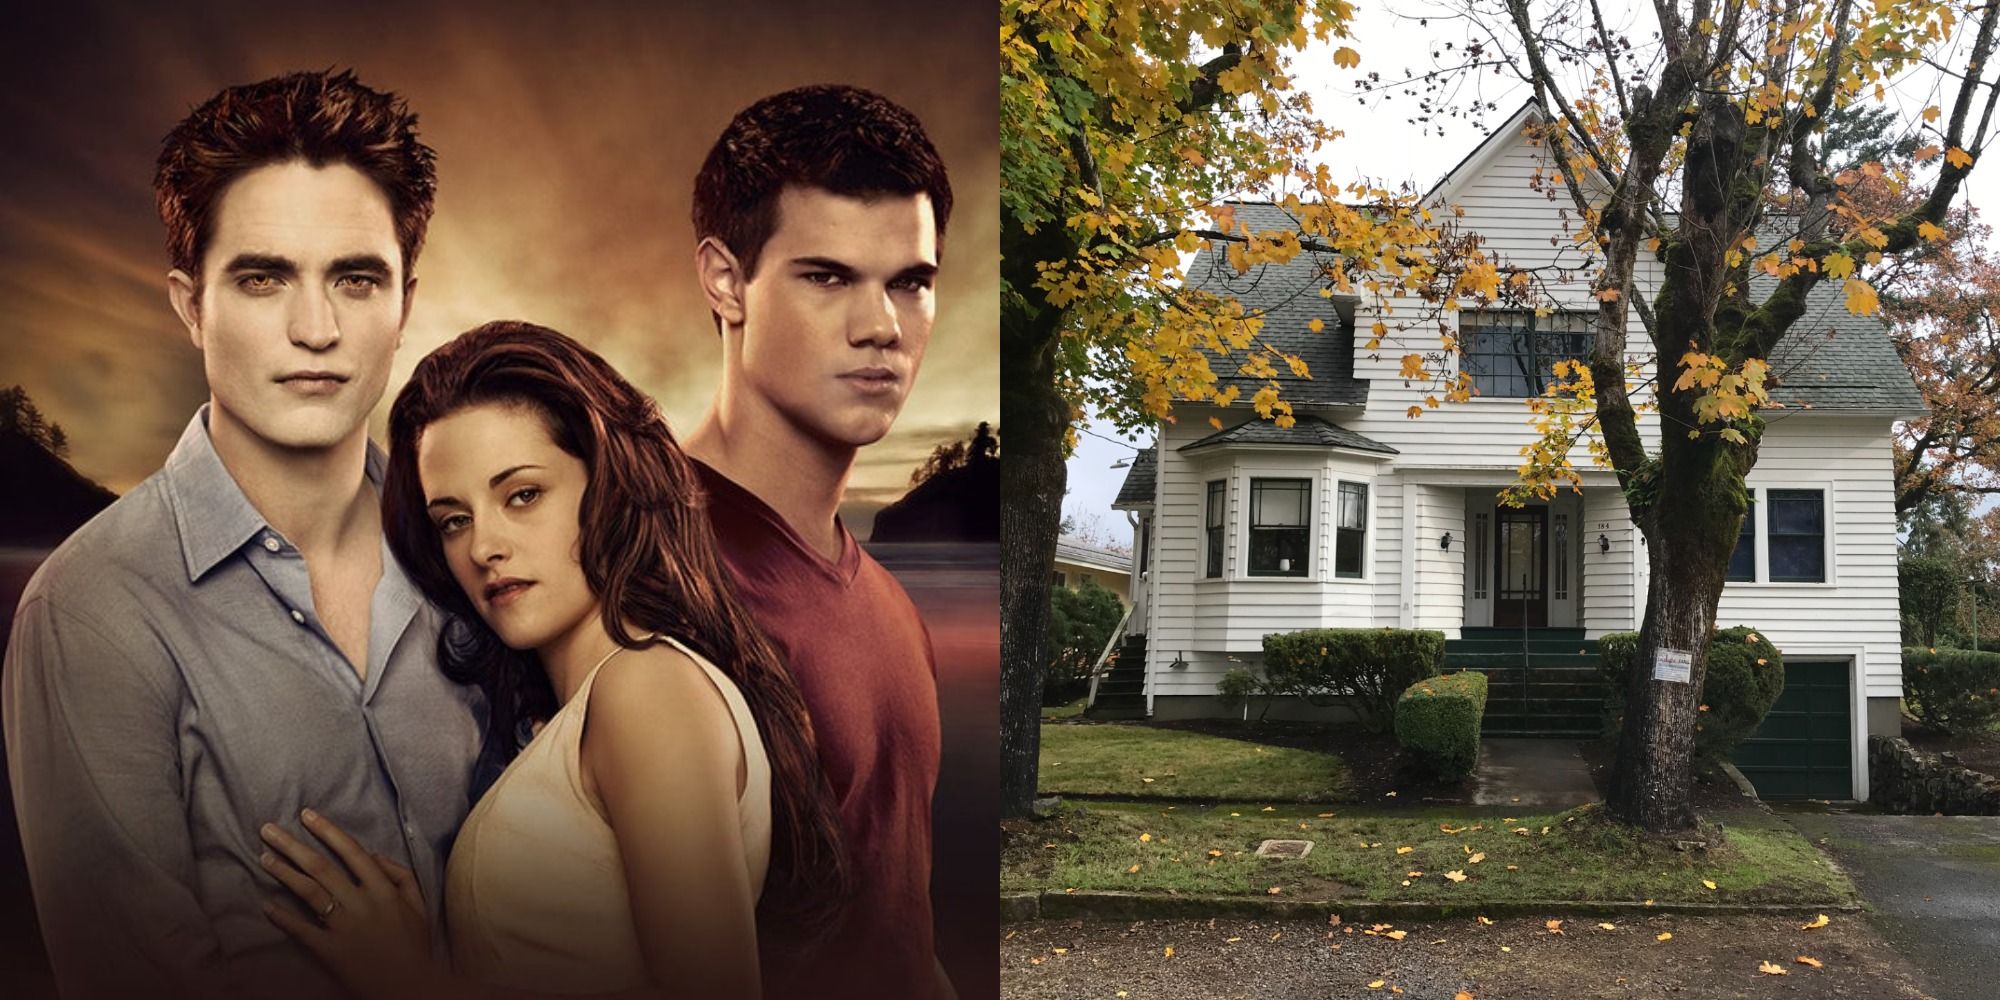 10 Filming Locations From The Twilight Saga You Can Actually Visit